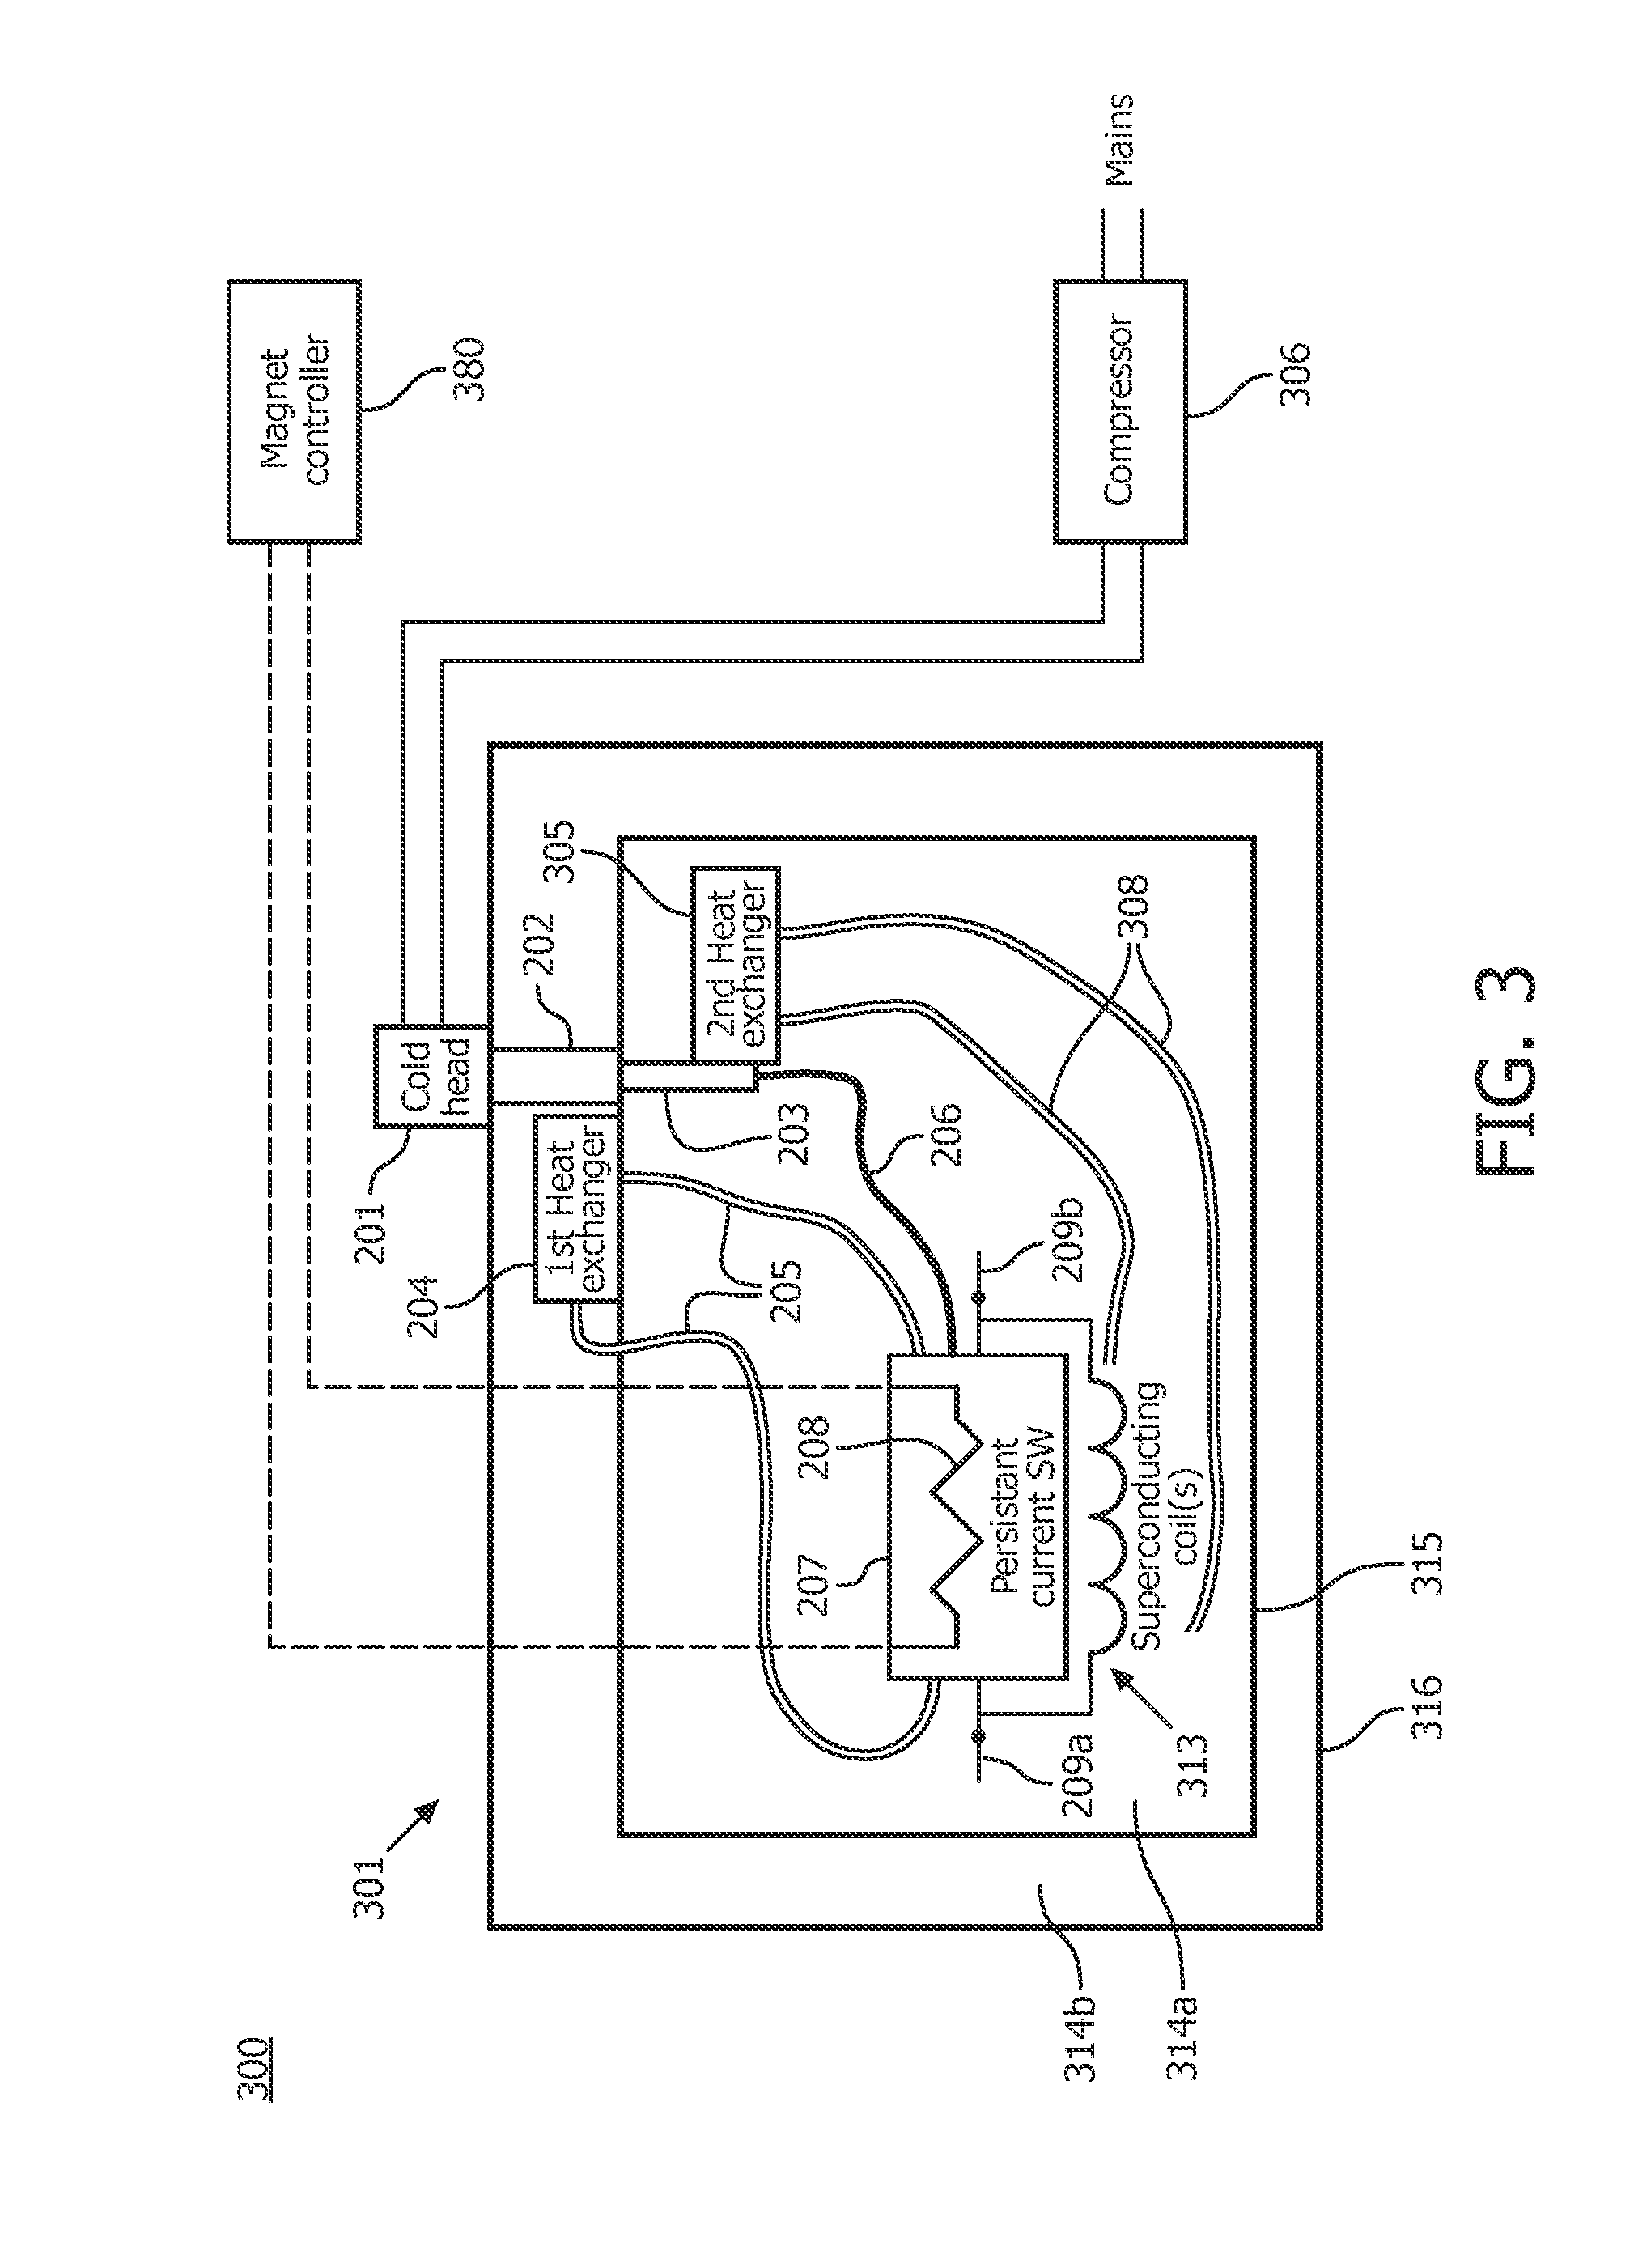 Low-loss persistent current switch with heat transfer arrangement